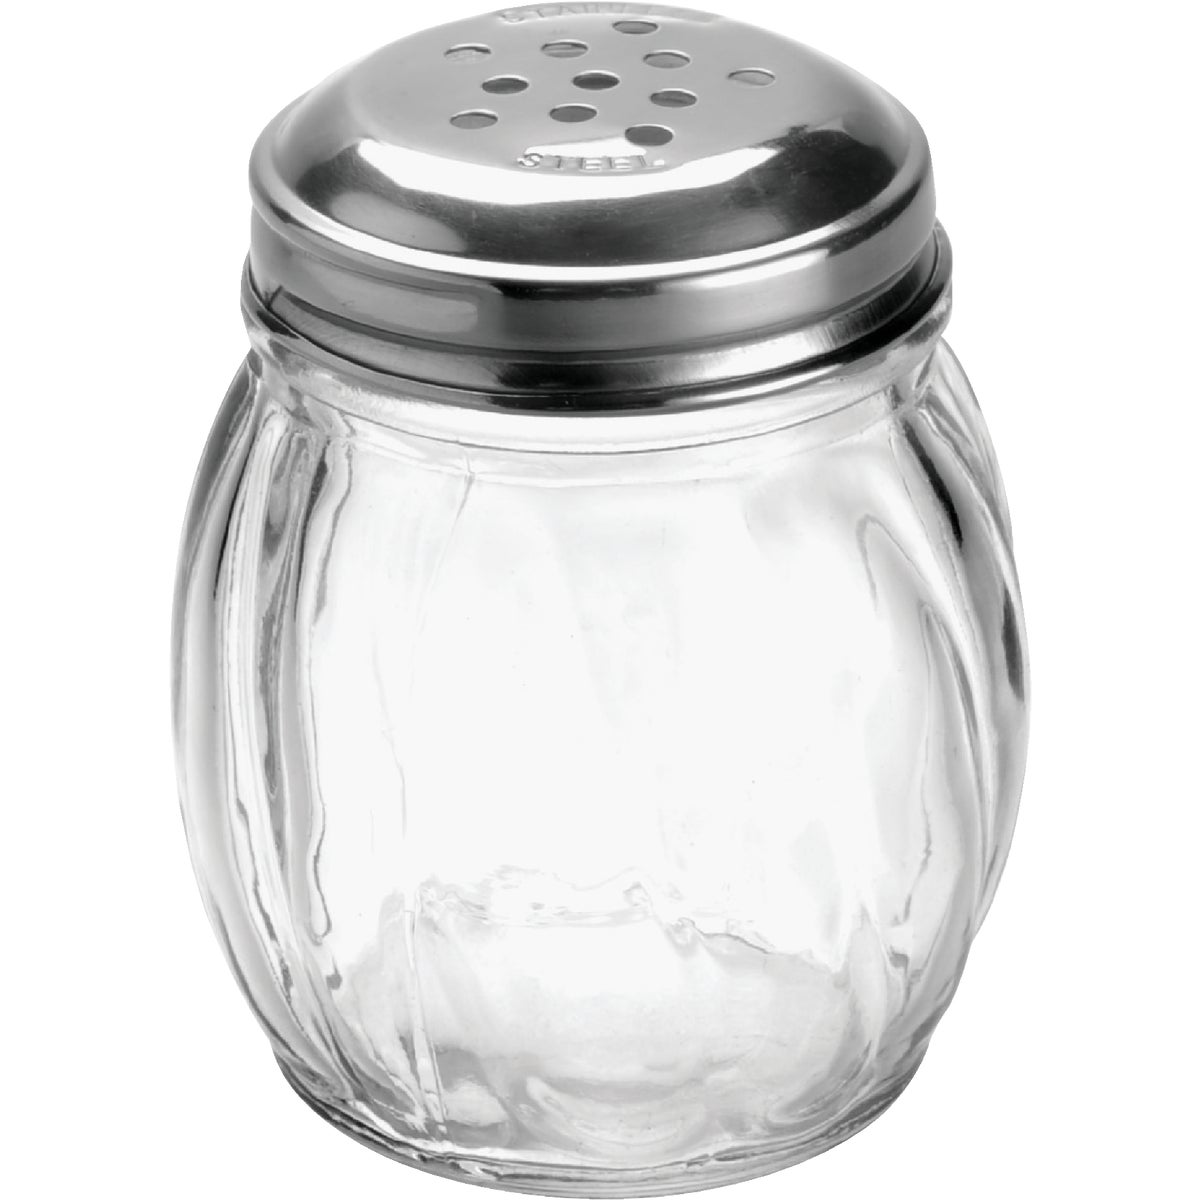 Item 603706, This Gemco glass cheese shaker is perfect for grated parmesan cheese, but 